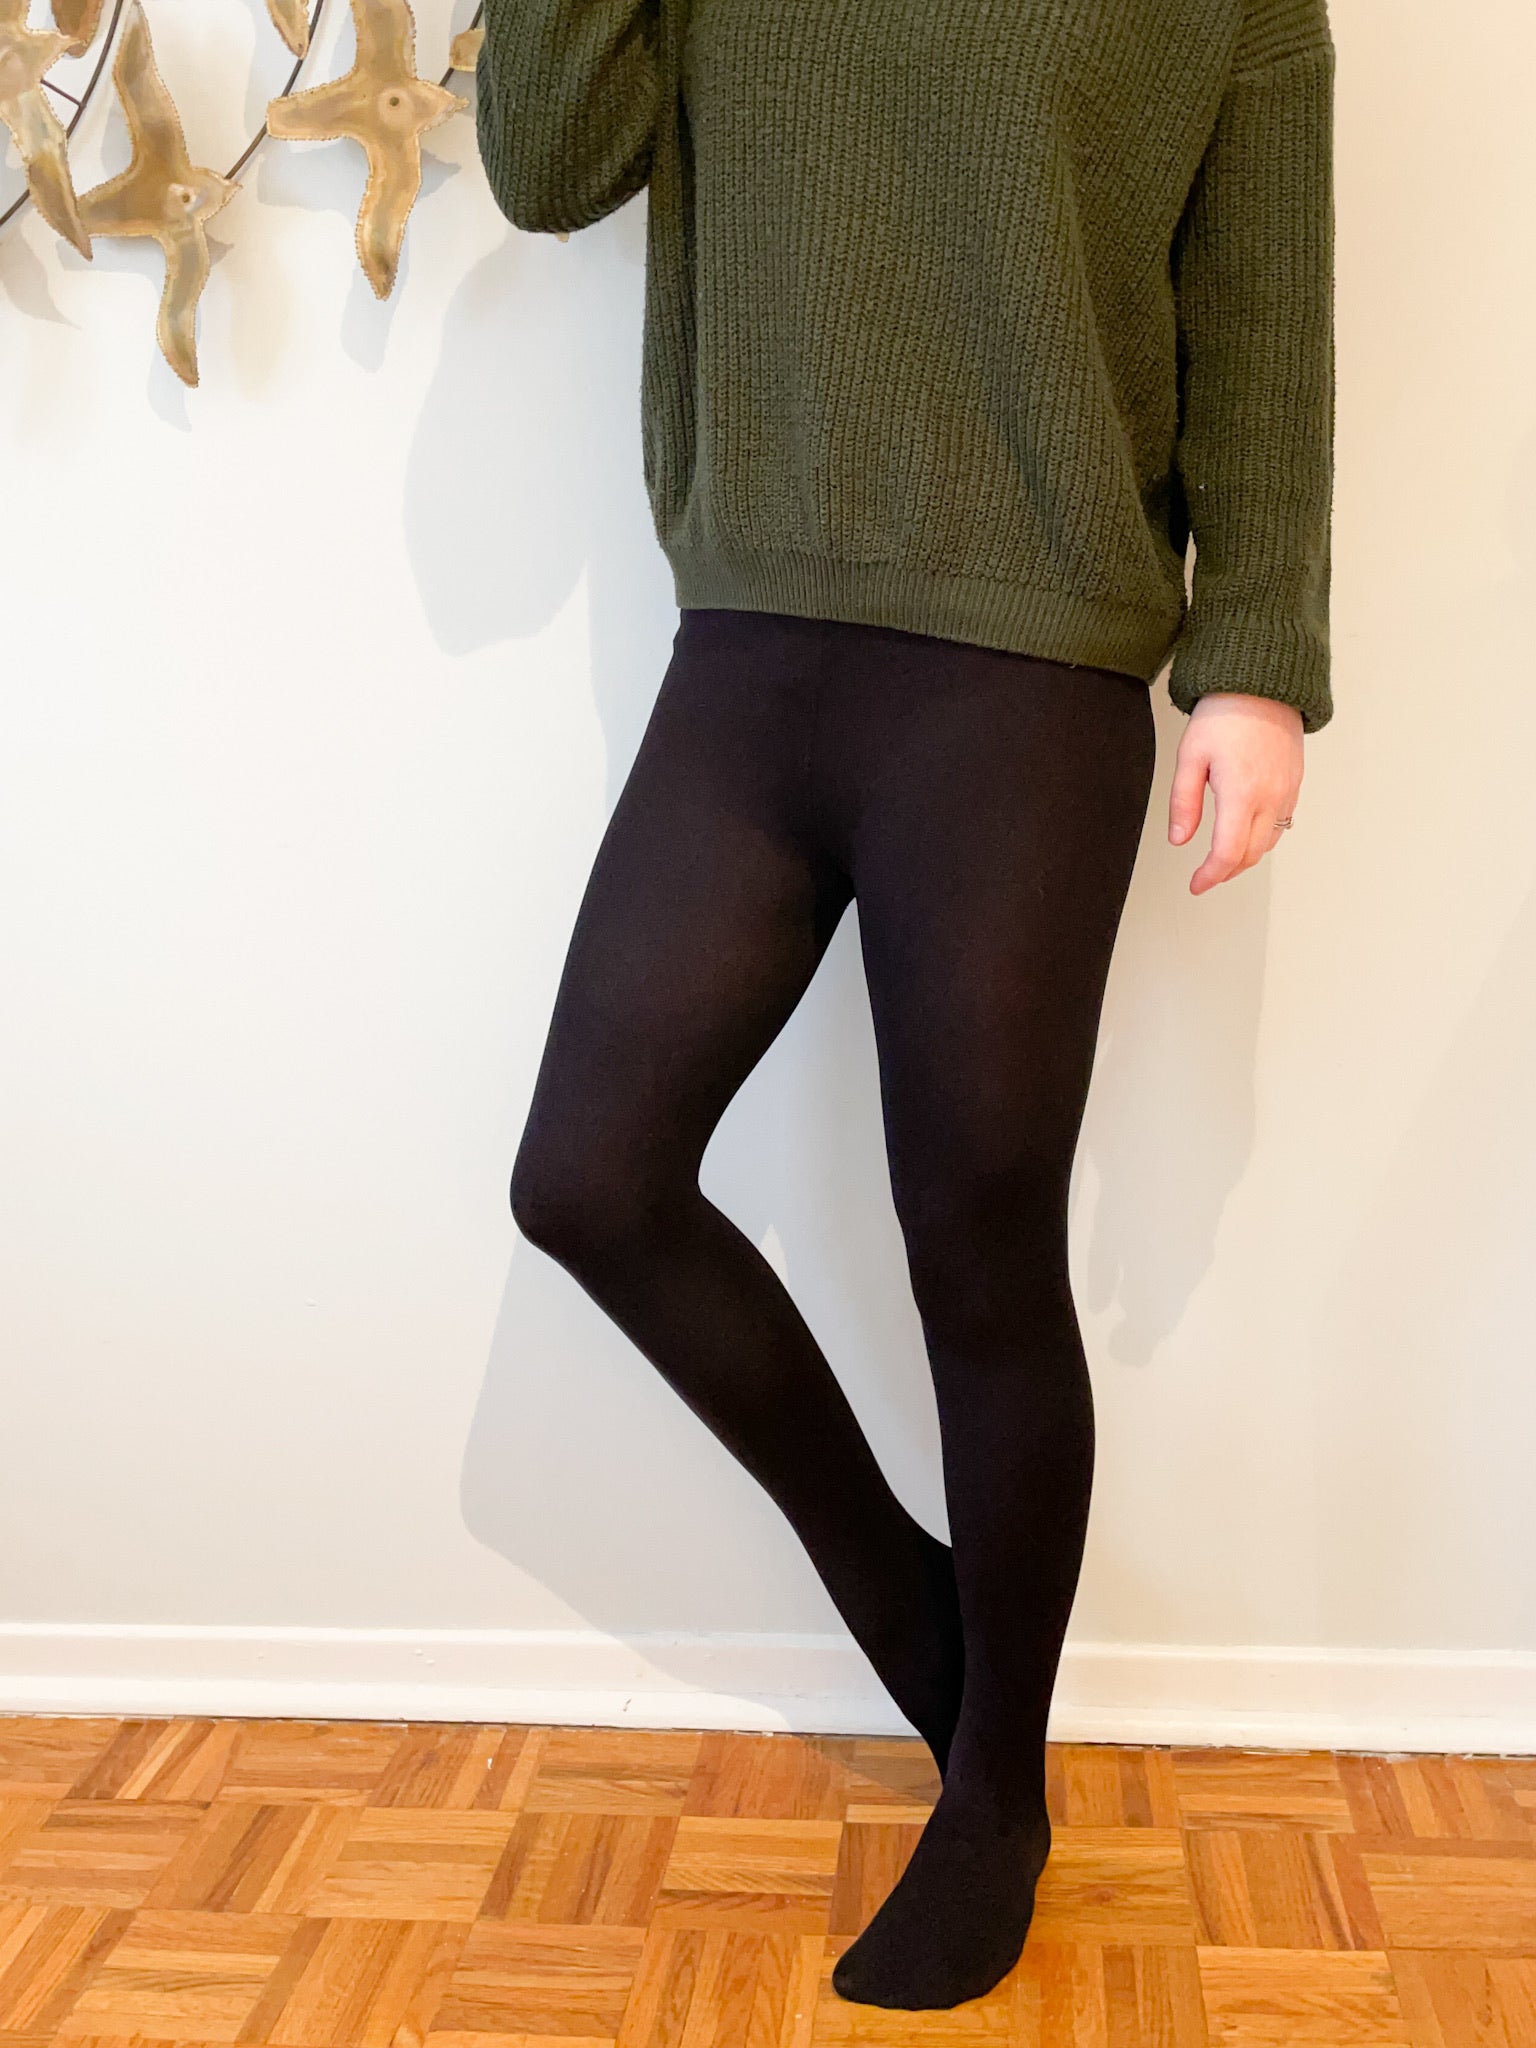 Black Footed Fleece Lined Tights - XS / Small Petite – Le Prix